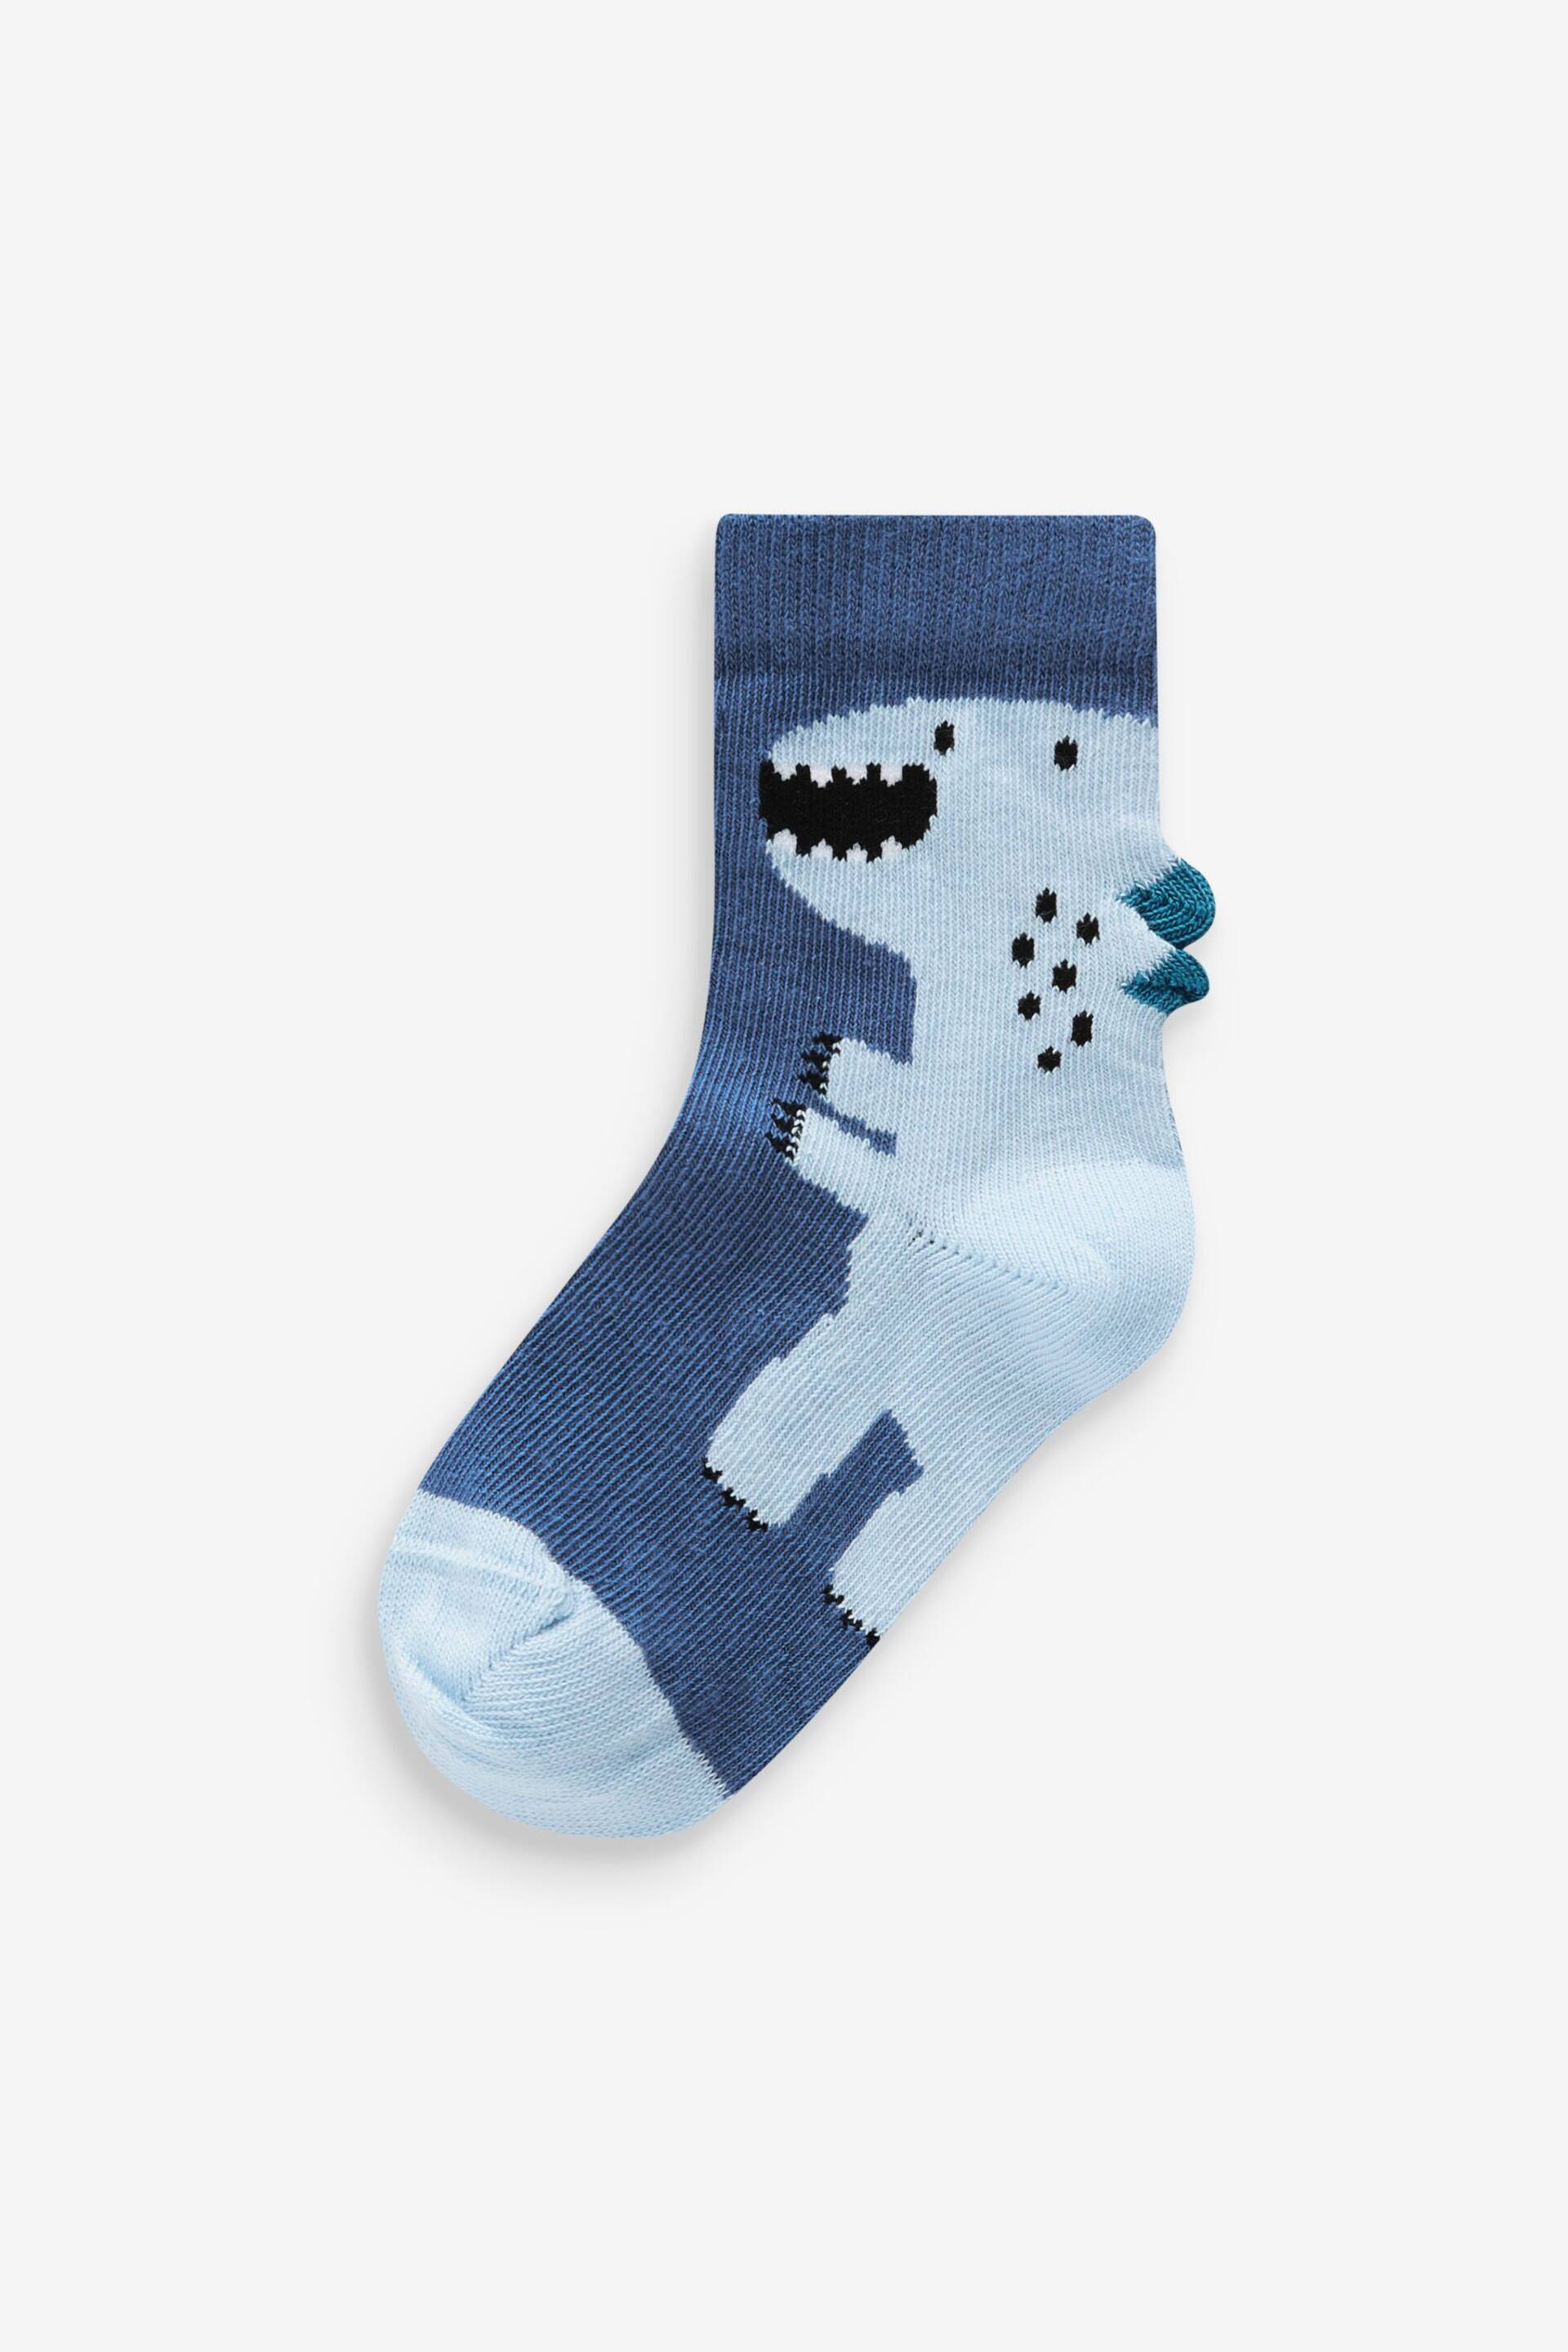 Blue Dino Cotton Rich Socks 7 Pack - Image 6 of 8